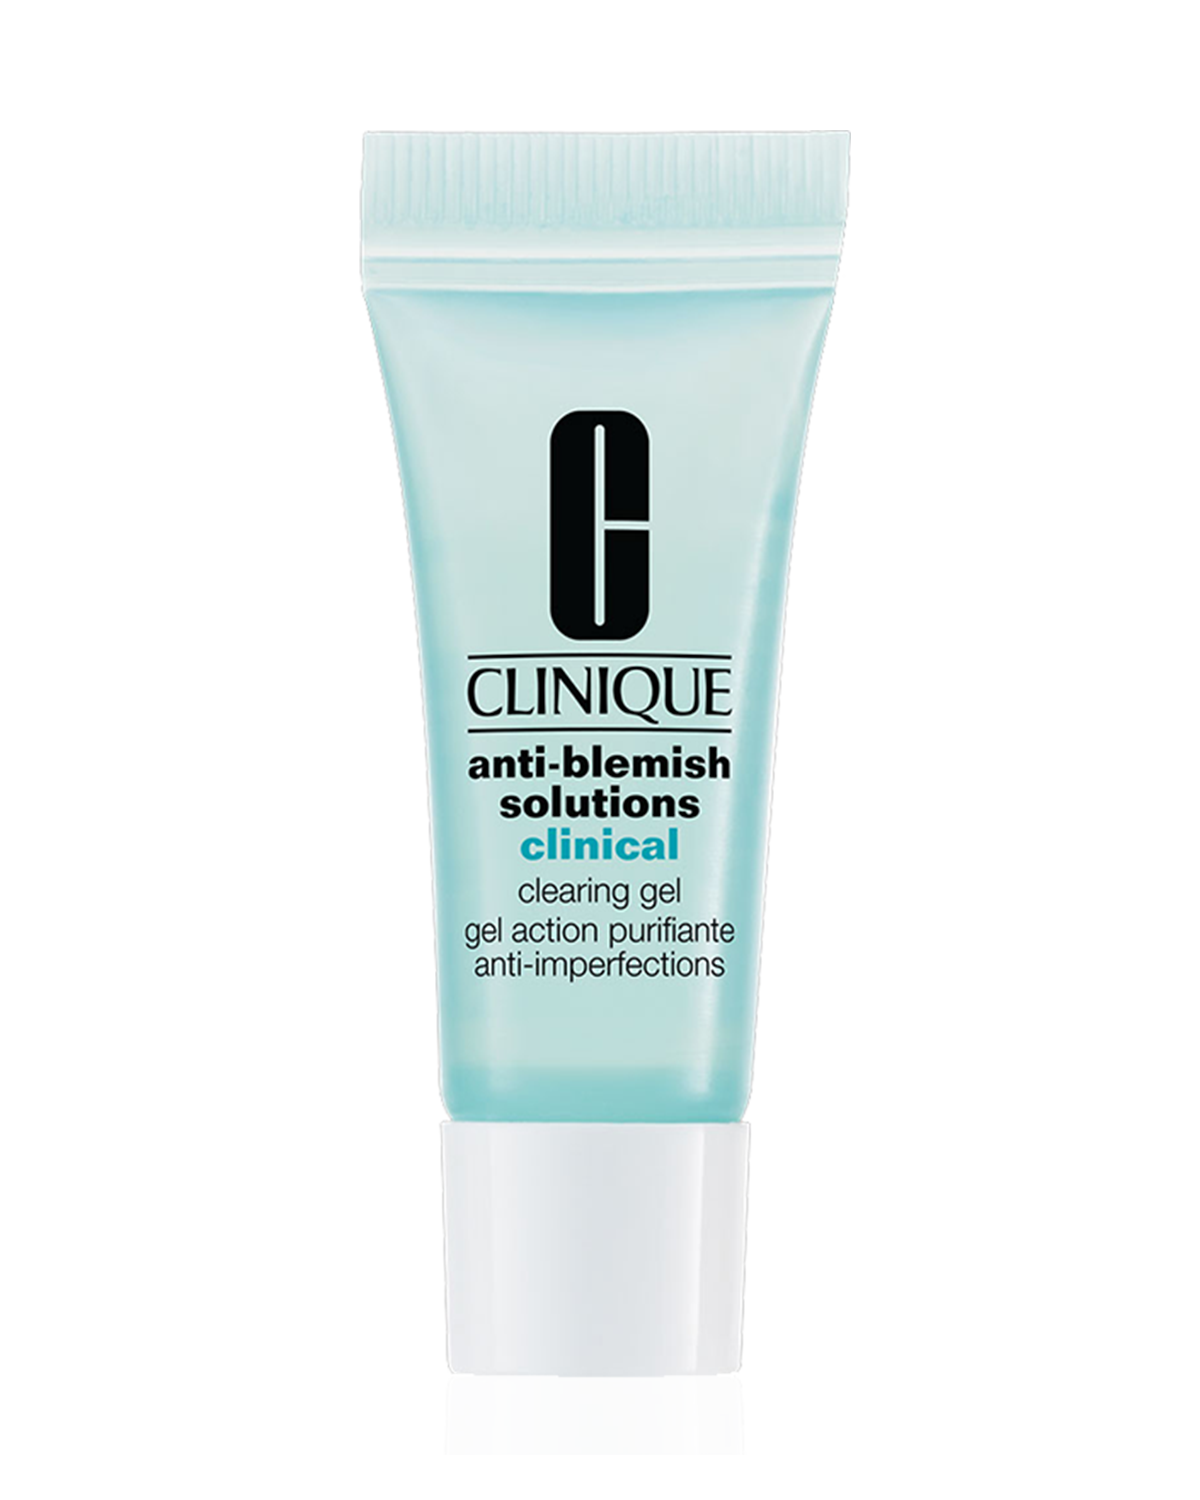 Anti-Blemish Solutions™ Clinical Clearing Gel